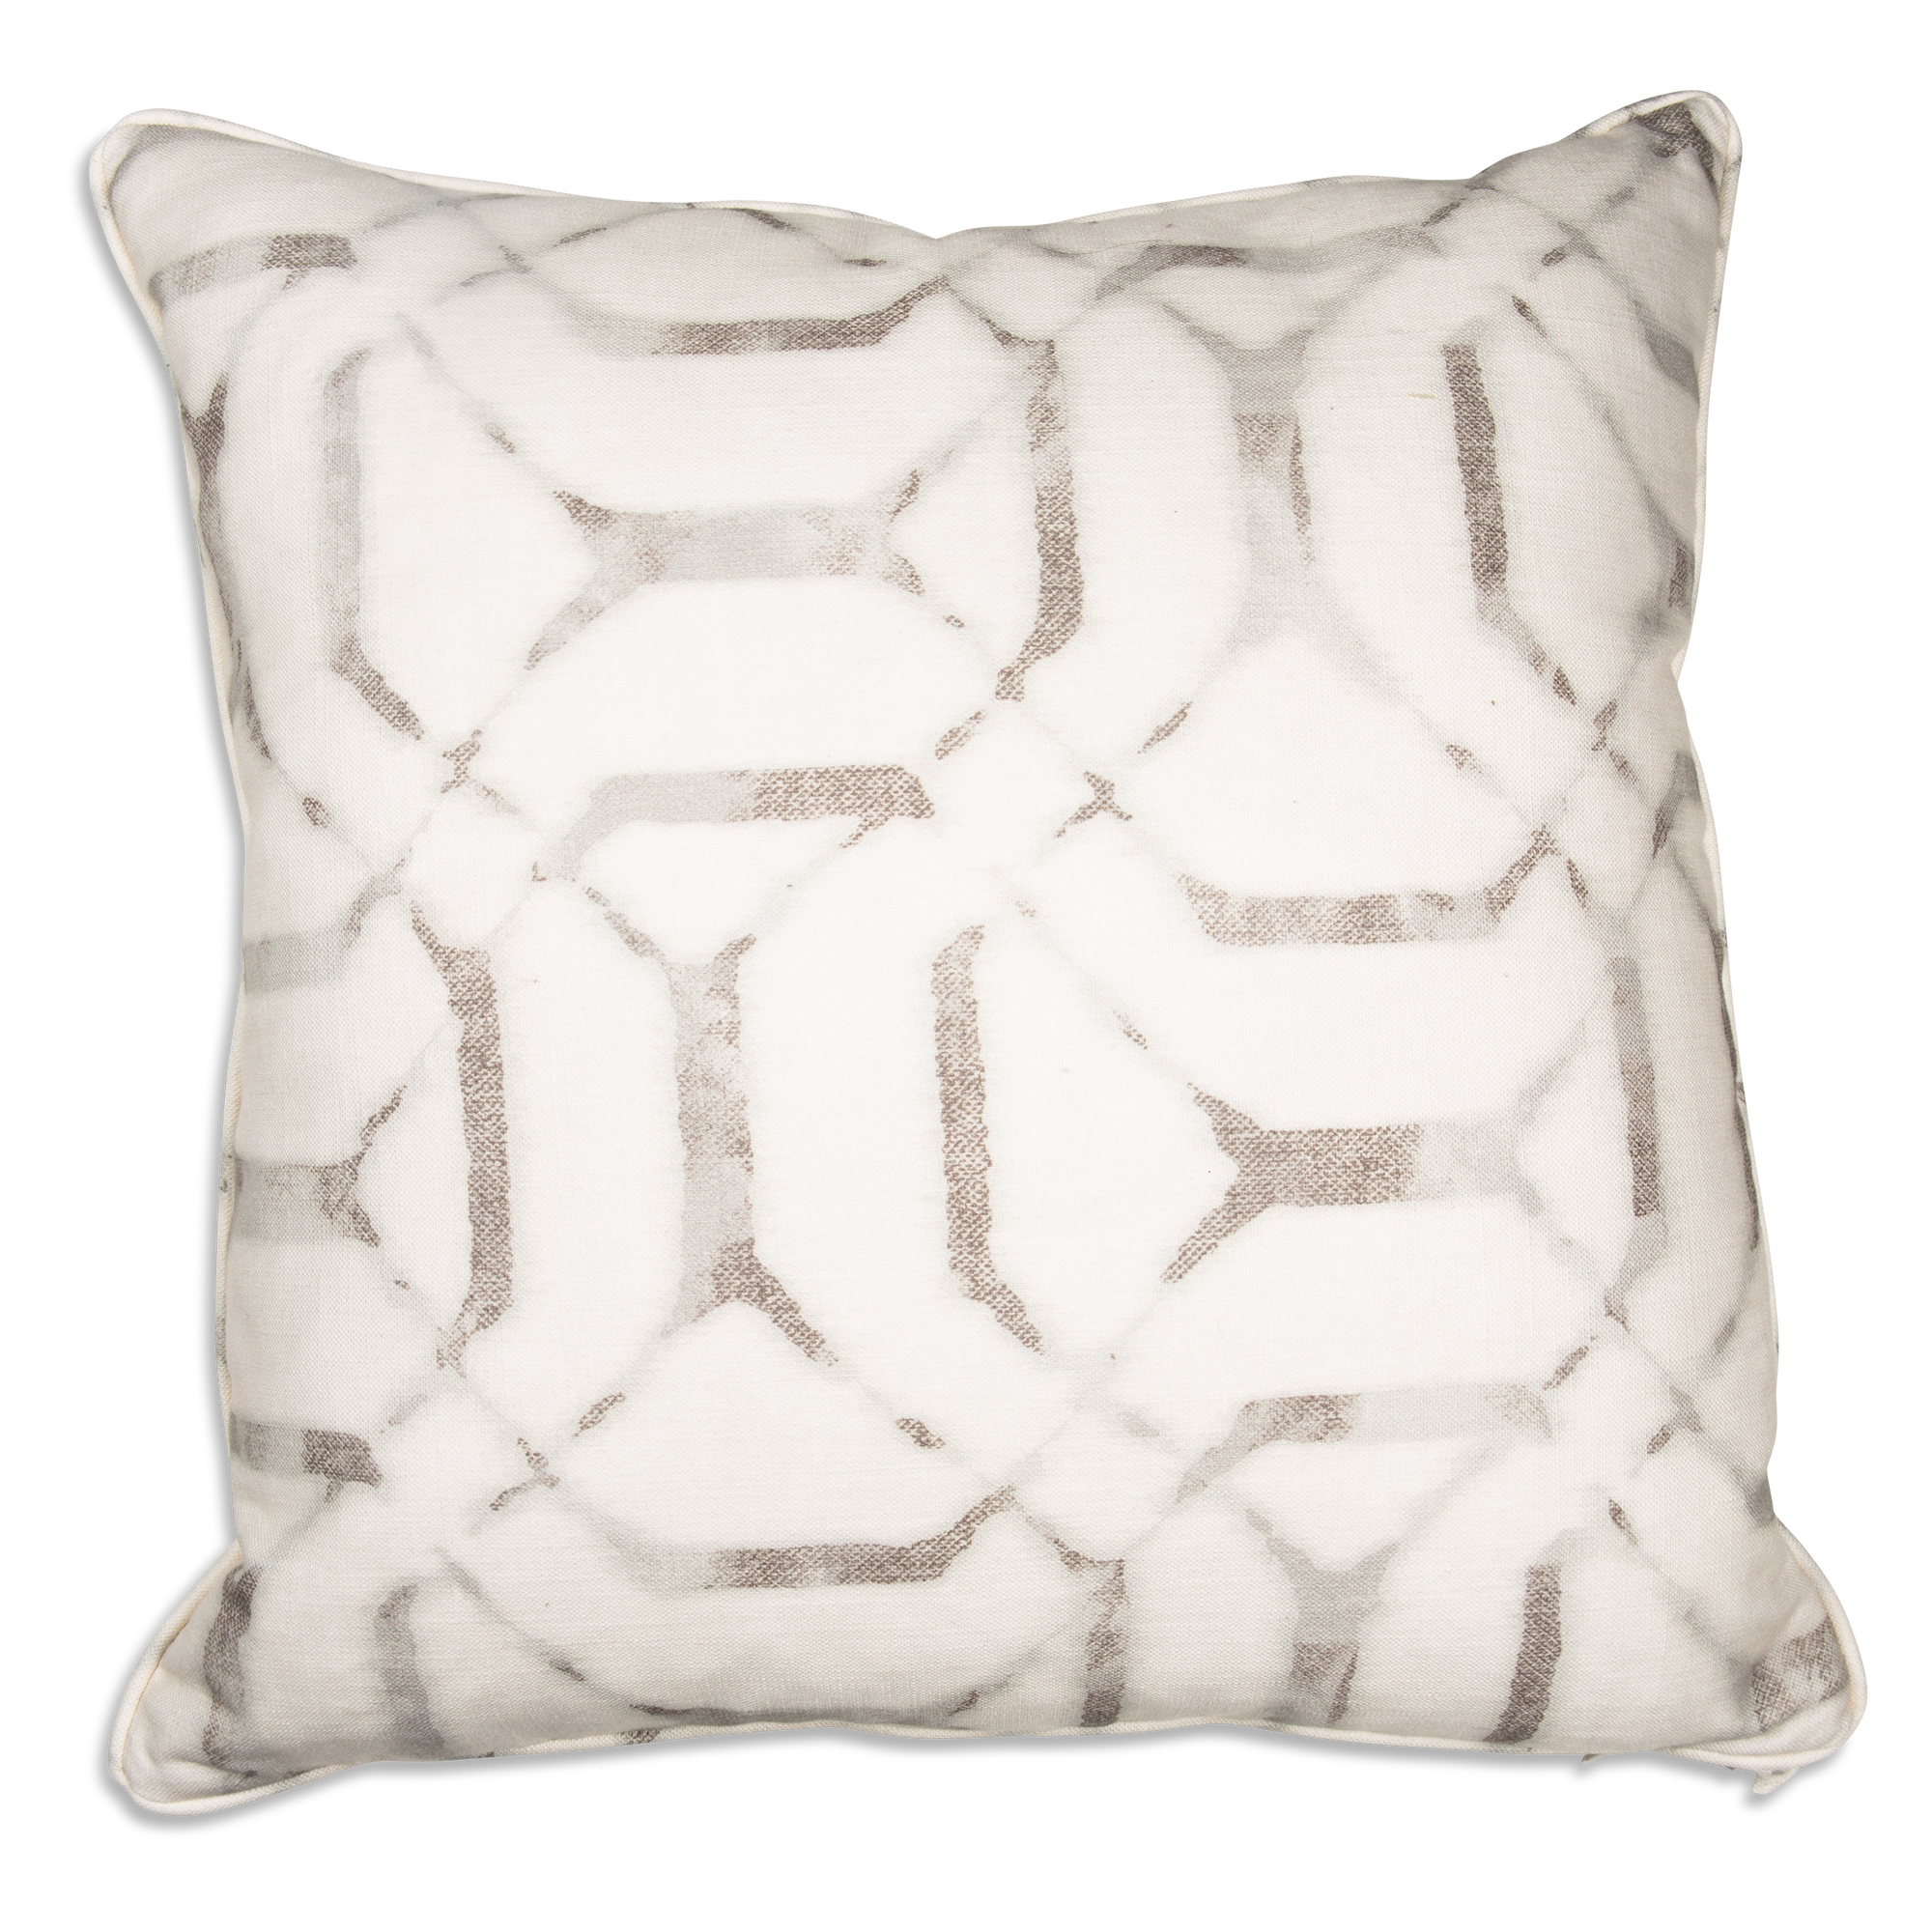 The Jepara Mineral Pillow features a geometric pattern in natural hues.